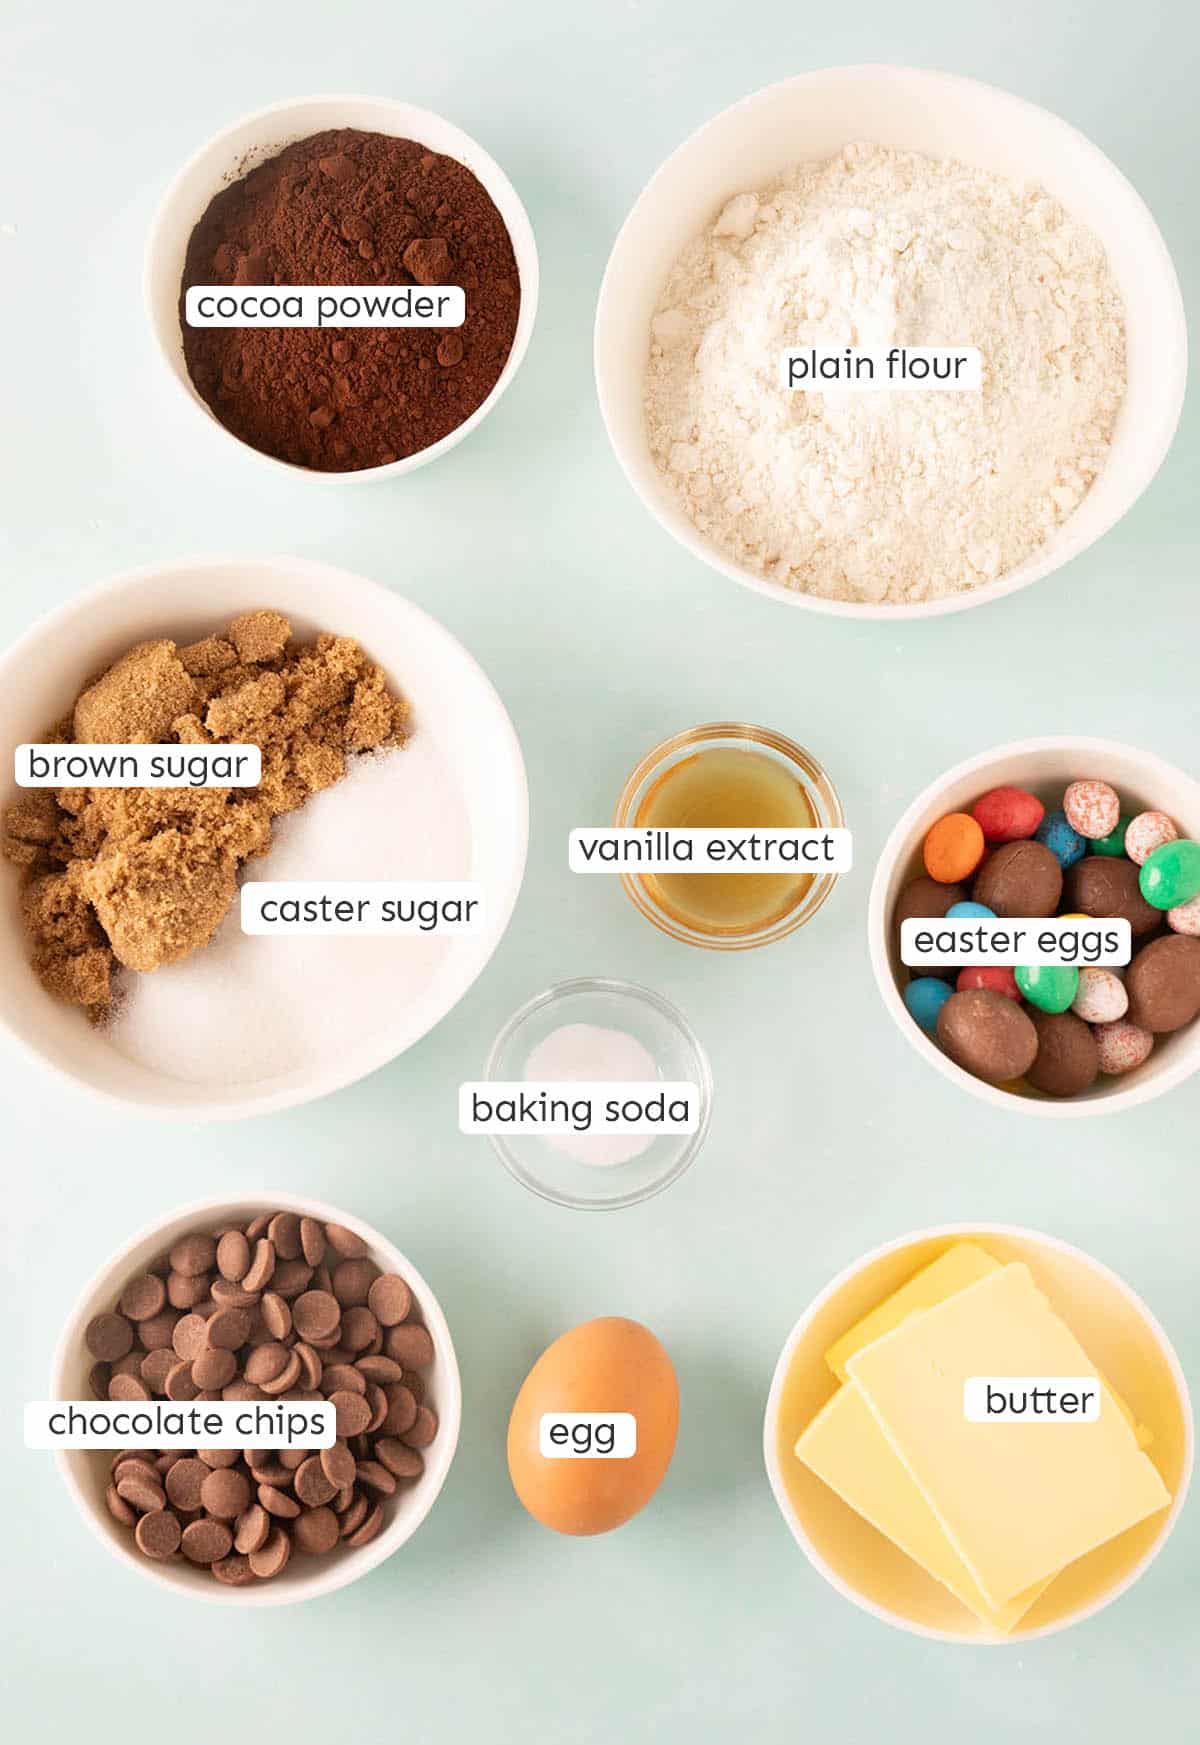 All the ingredients needed to make Chocolate Easter Egg Cookies from scratch.